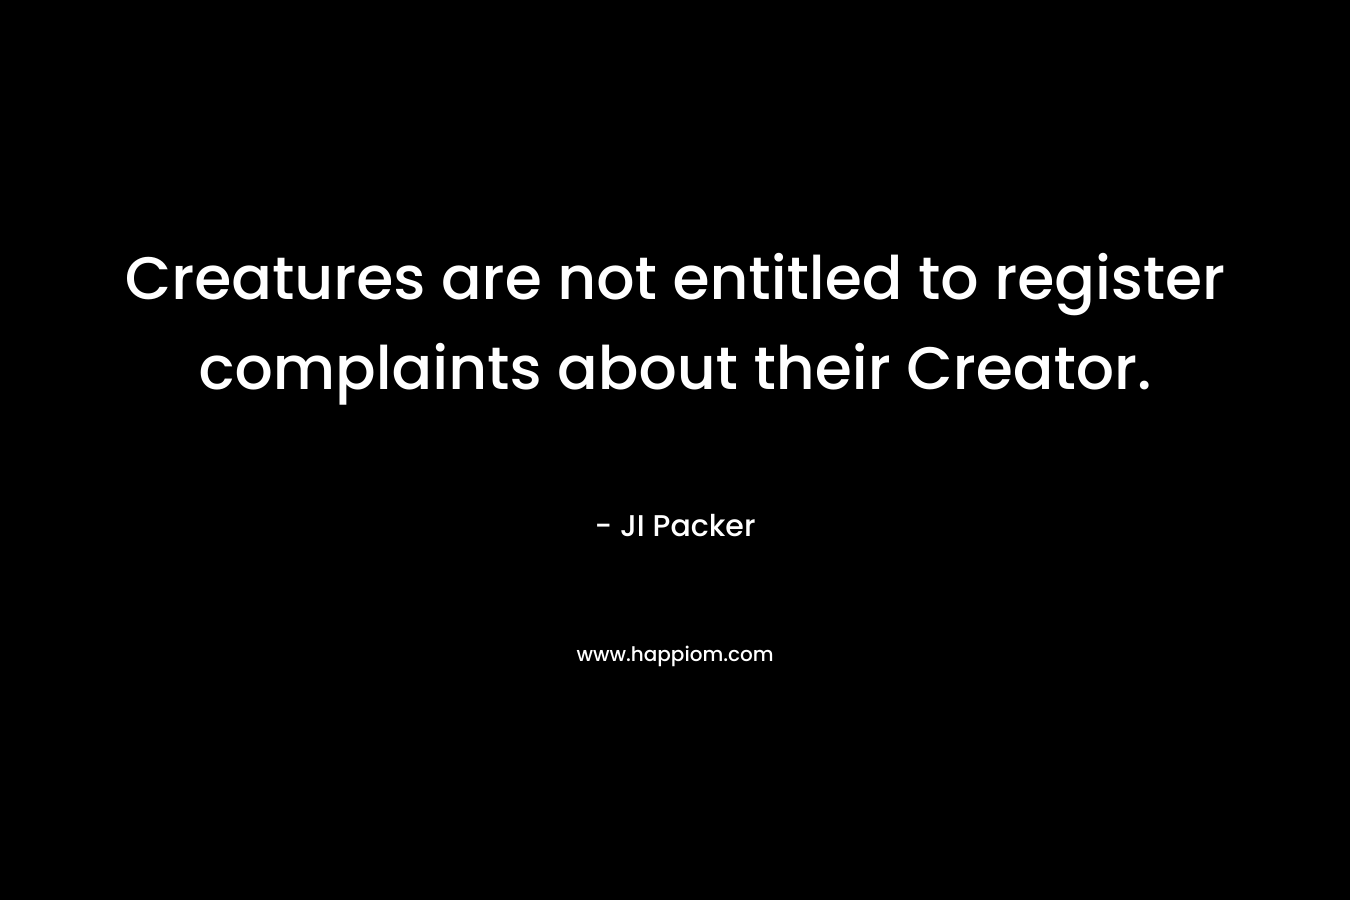 Creatures are not entitled to register complaints about their Creator. – JI Packer